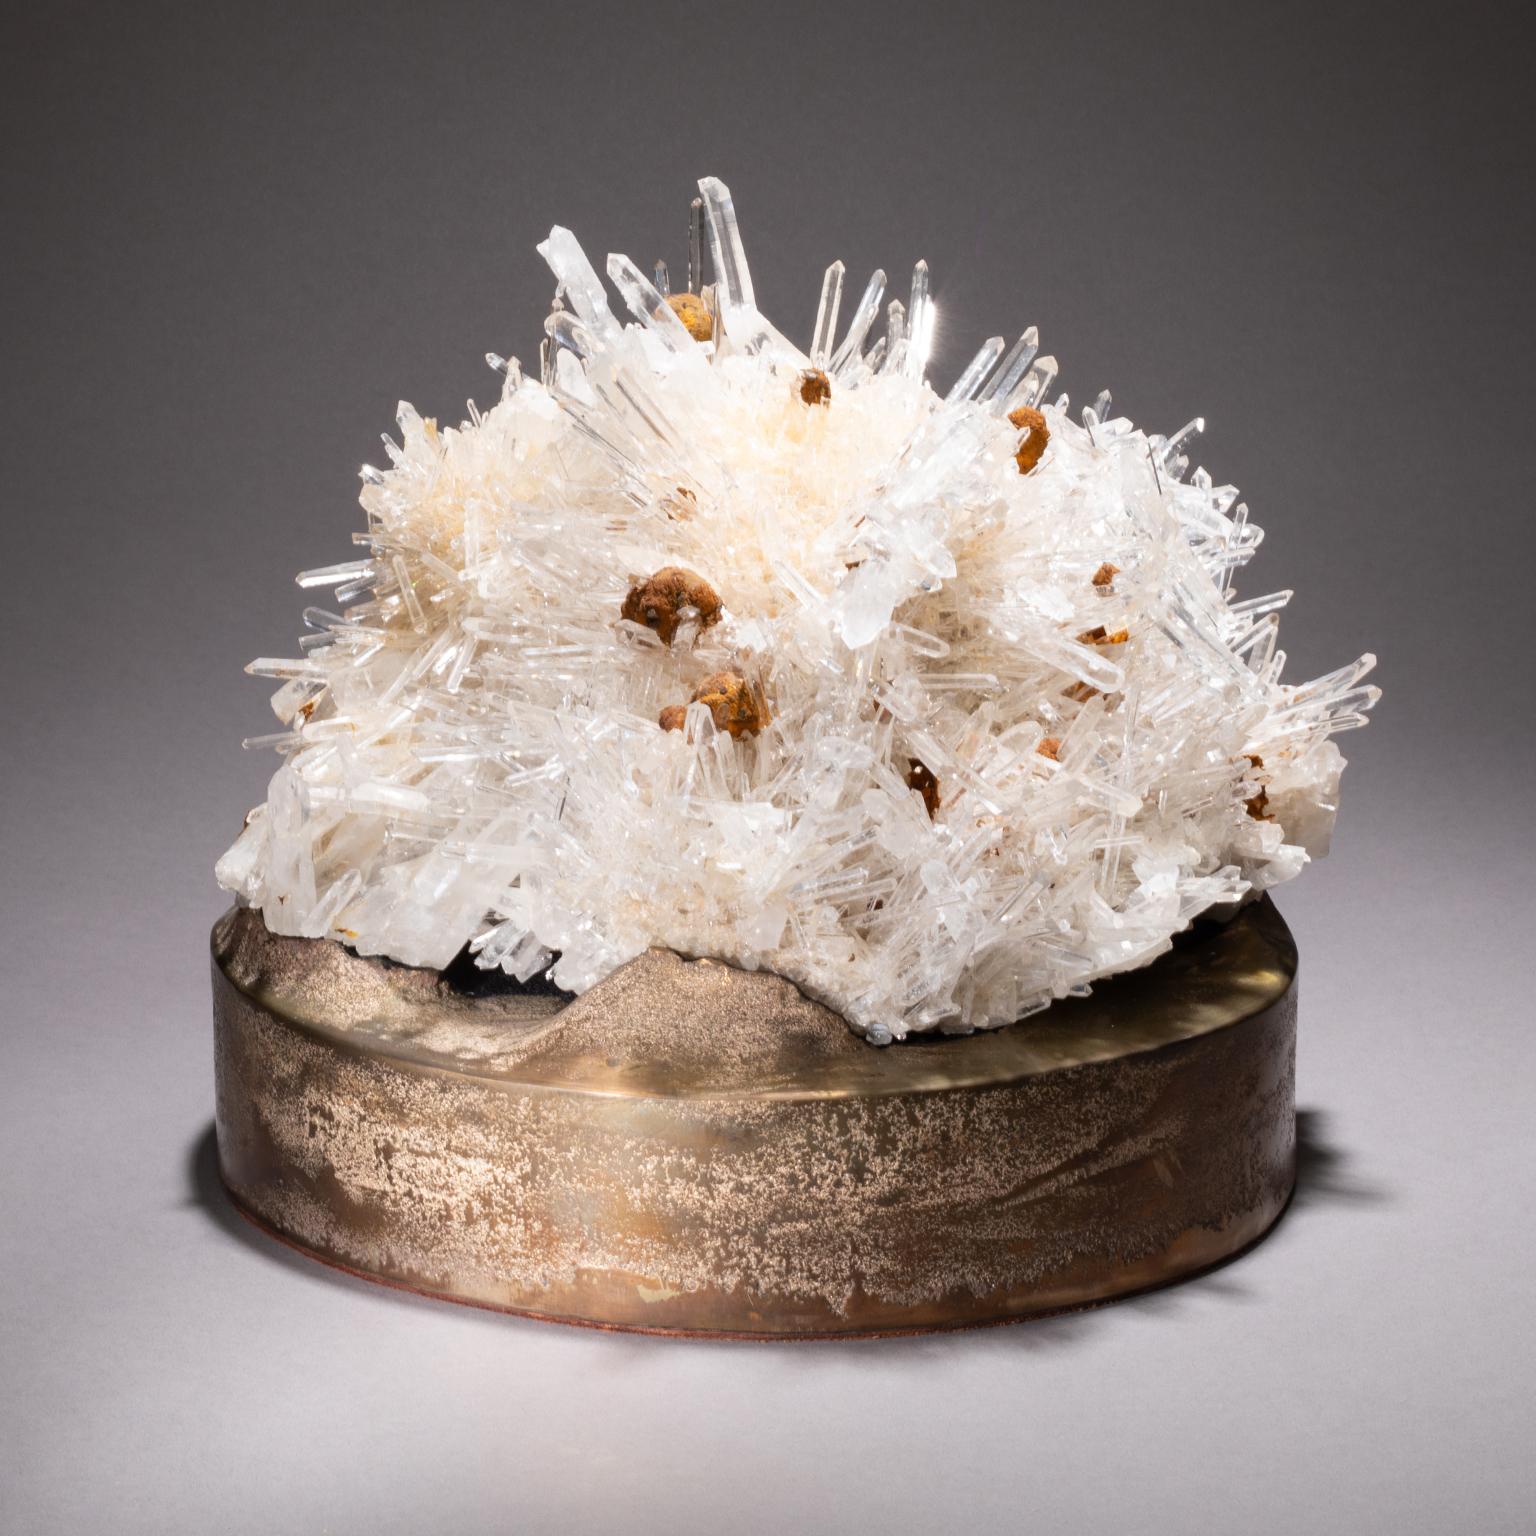 Colombian quartz on cast bronze base

Studio Greytak’s Colombian quartz on cast bronze elevates an eruption of ultra-clear quartz crystals on a flowing cast bronze base. These points are all naturally formed and reinforce natures ability to create